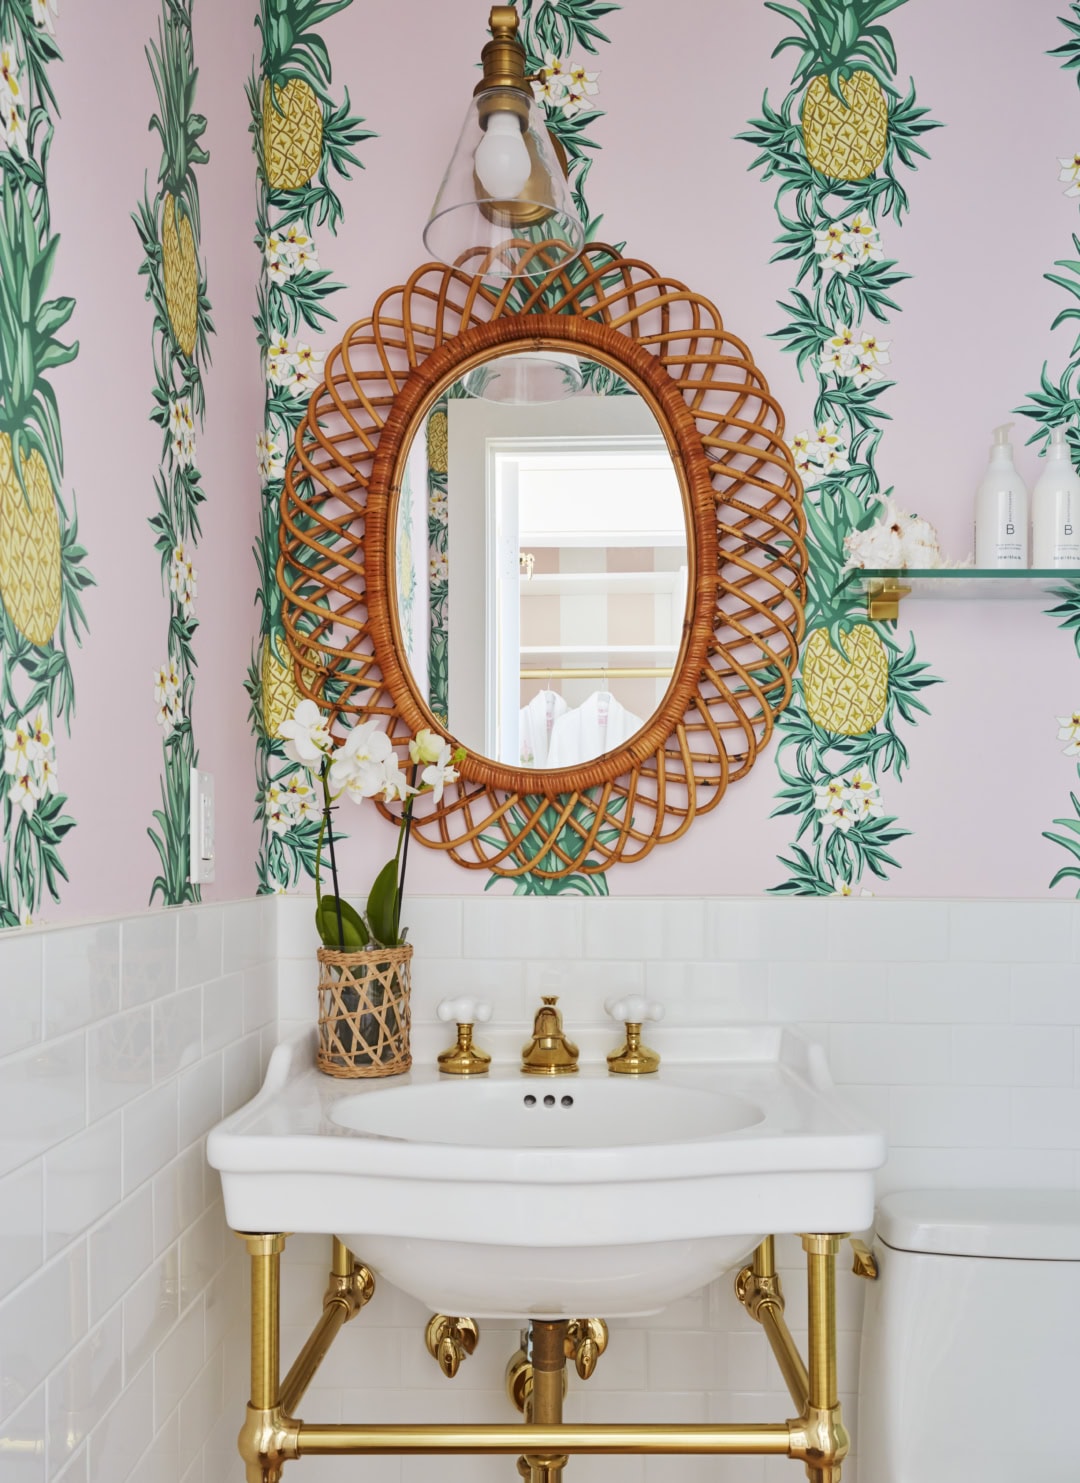 bathroom in pin and greens colors featuring tropical wallpaper